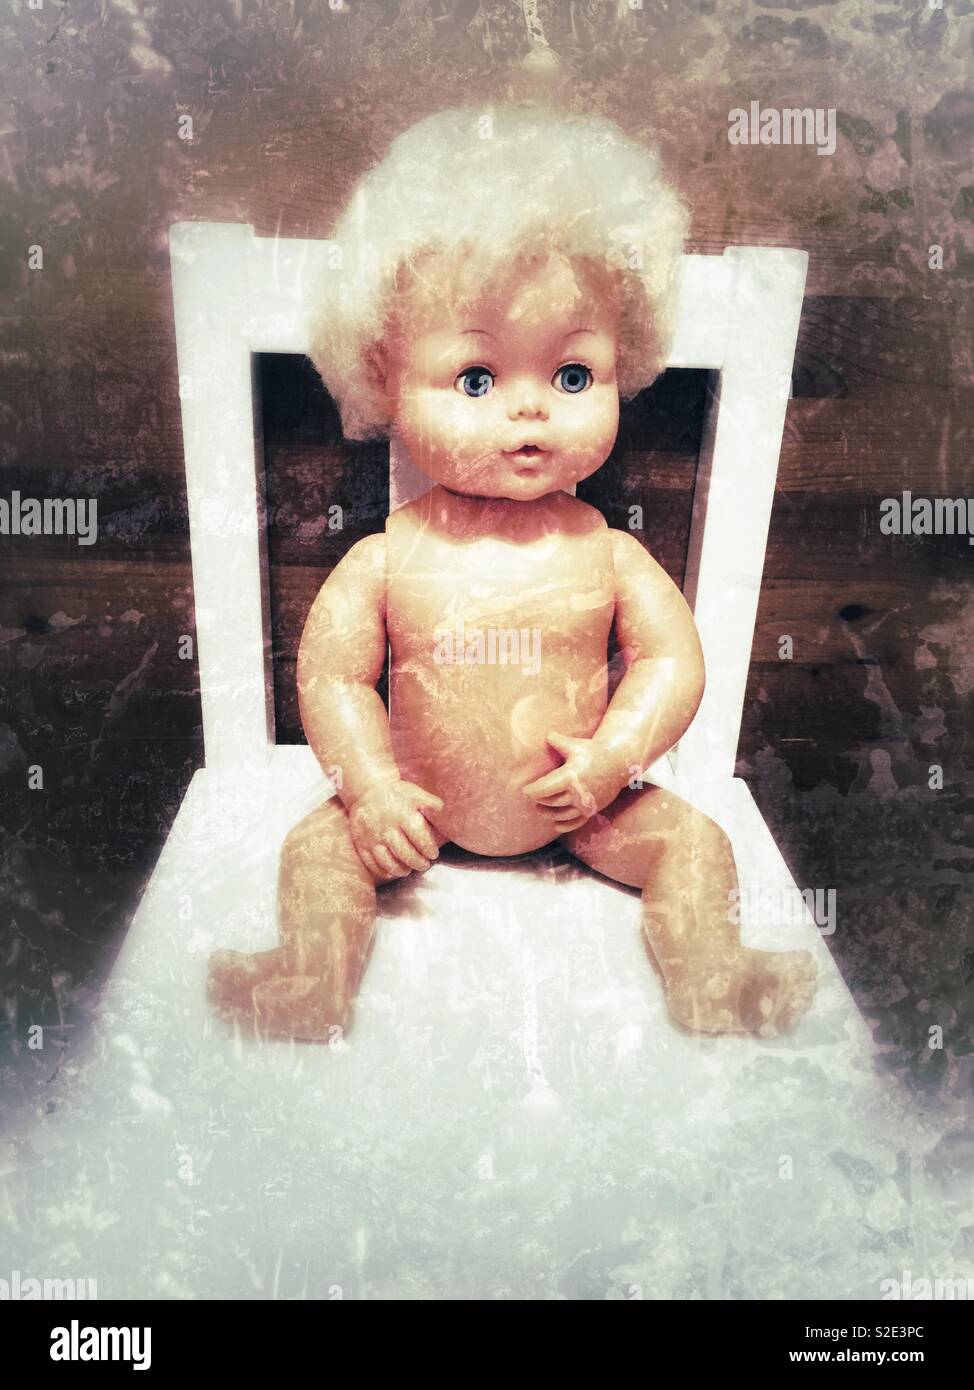 Grunge Effect of 1970s/80s Tiny Tears Doll. Stock Photo